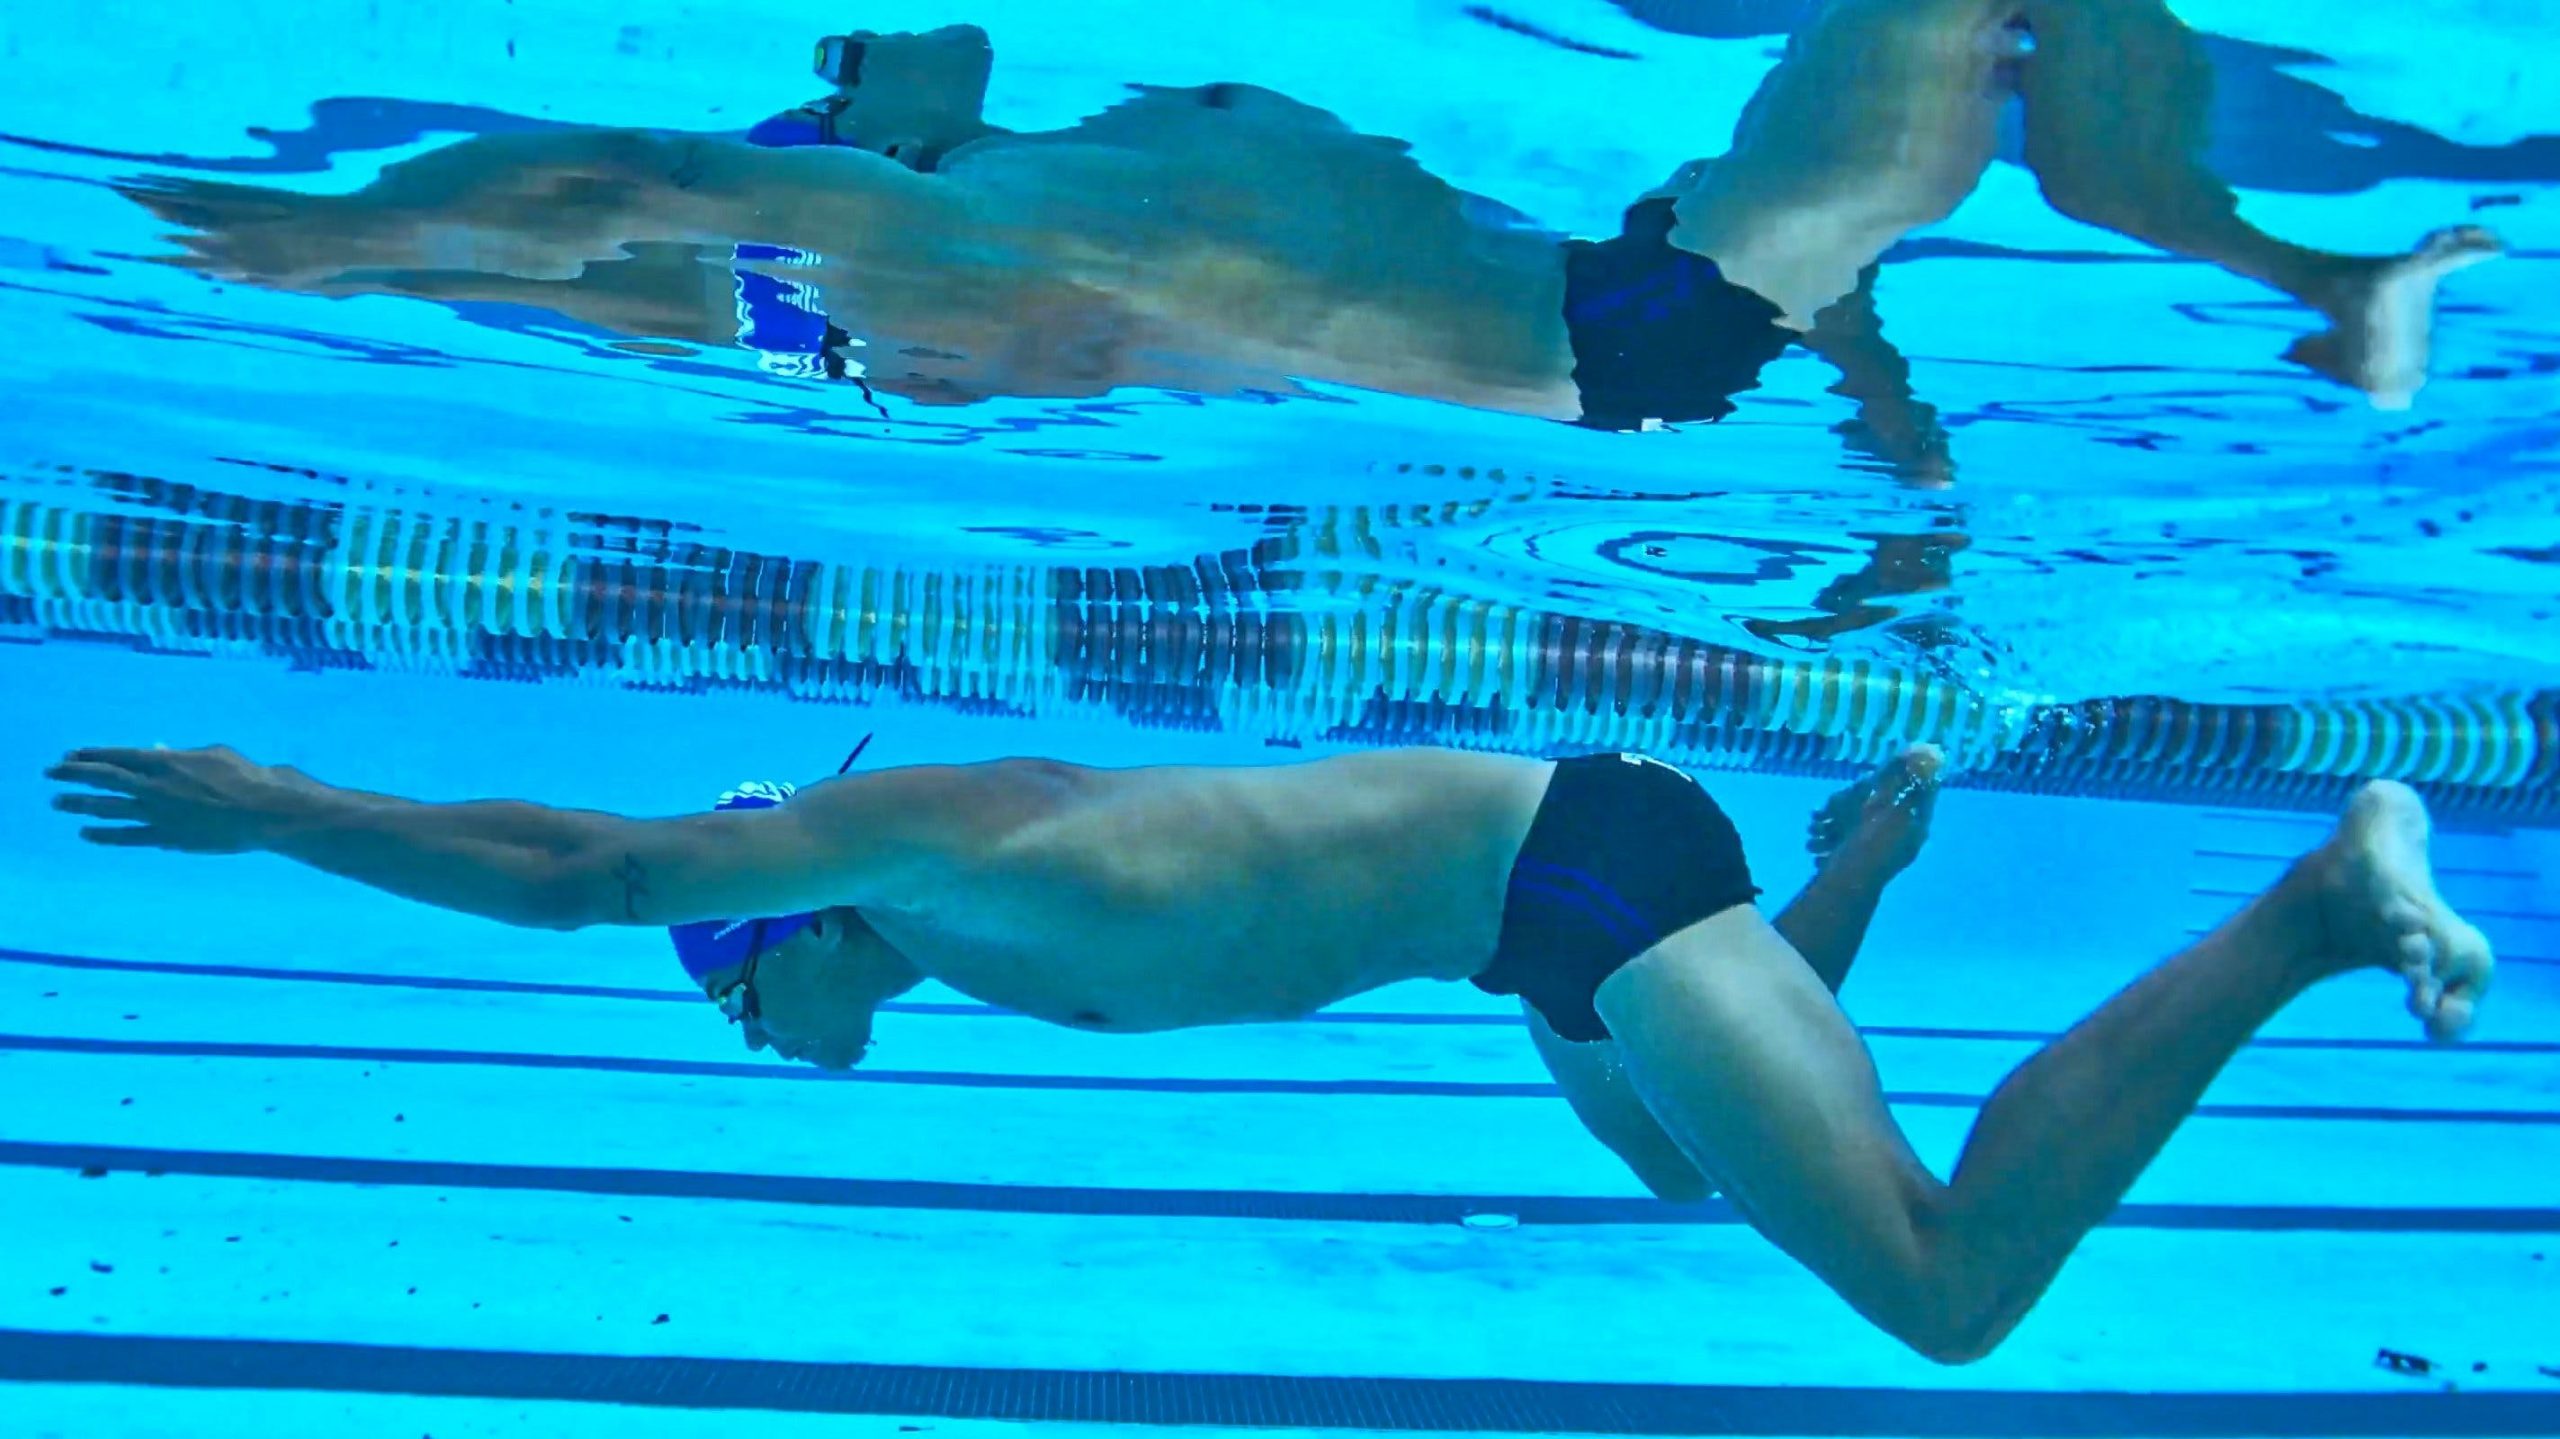 Footwork is the crucial element of the breaststroke technique